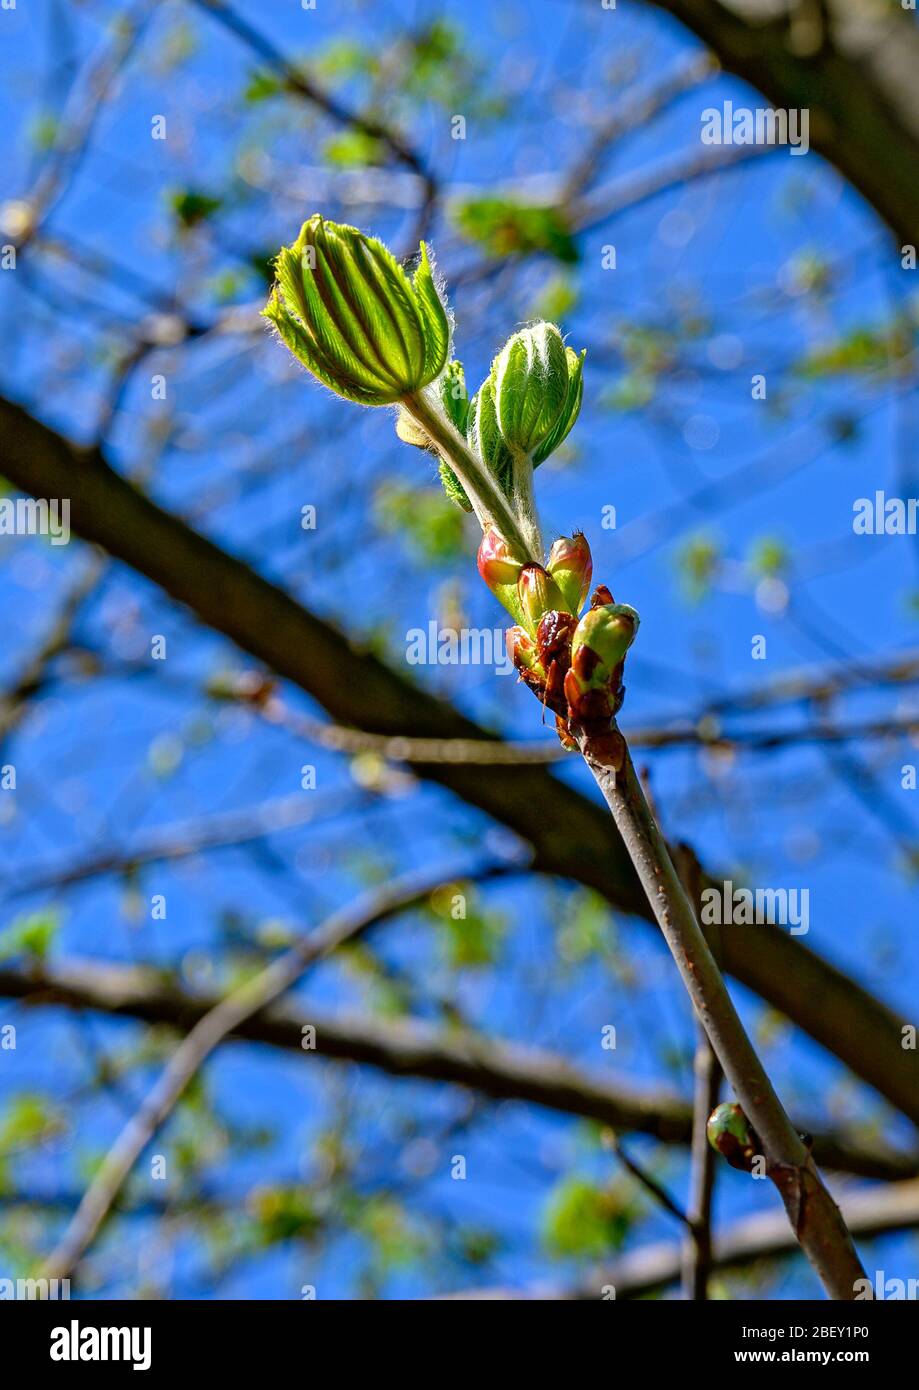 leaves unfolding from the bud of a horse chestnut tree Stock Photo